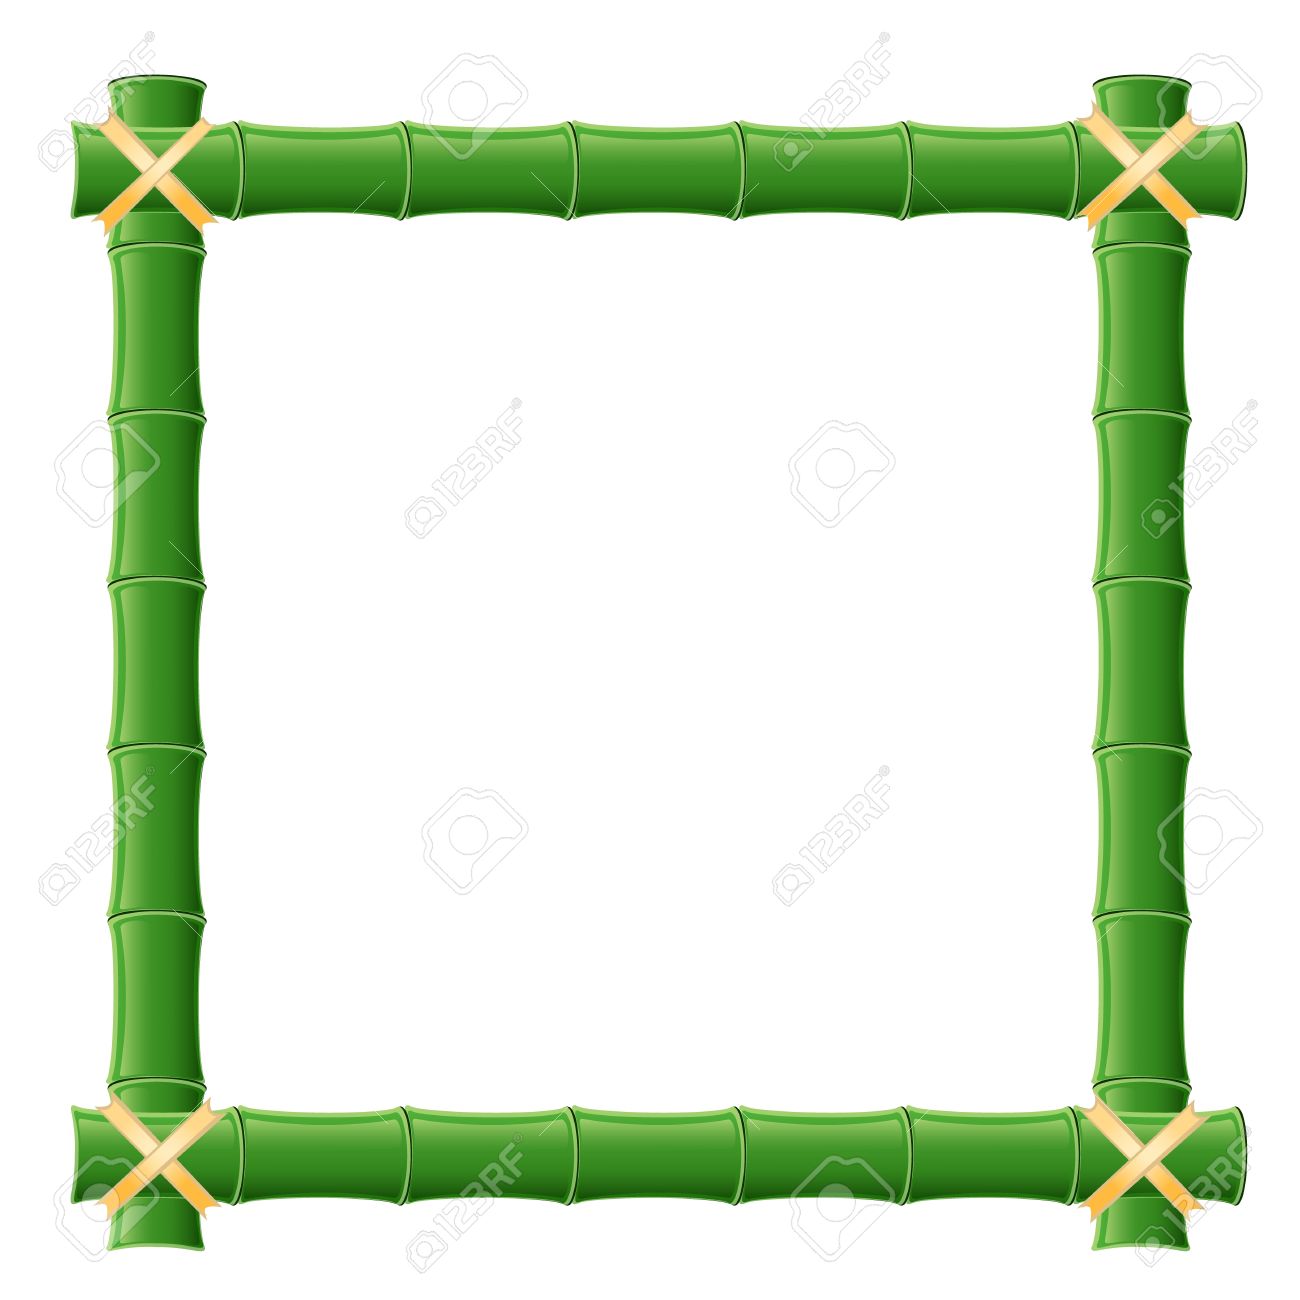 Bamboo Frame Royalty Free Cliparts, Vectors, And Stock.